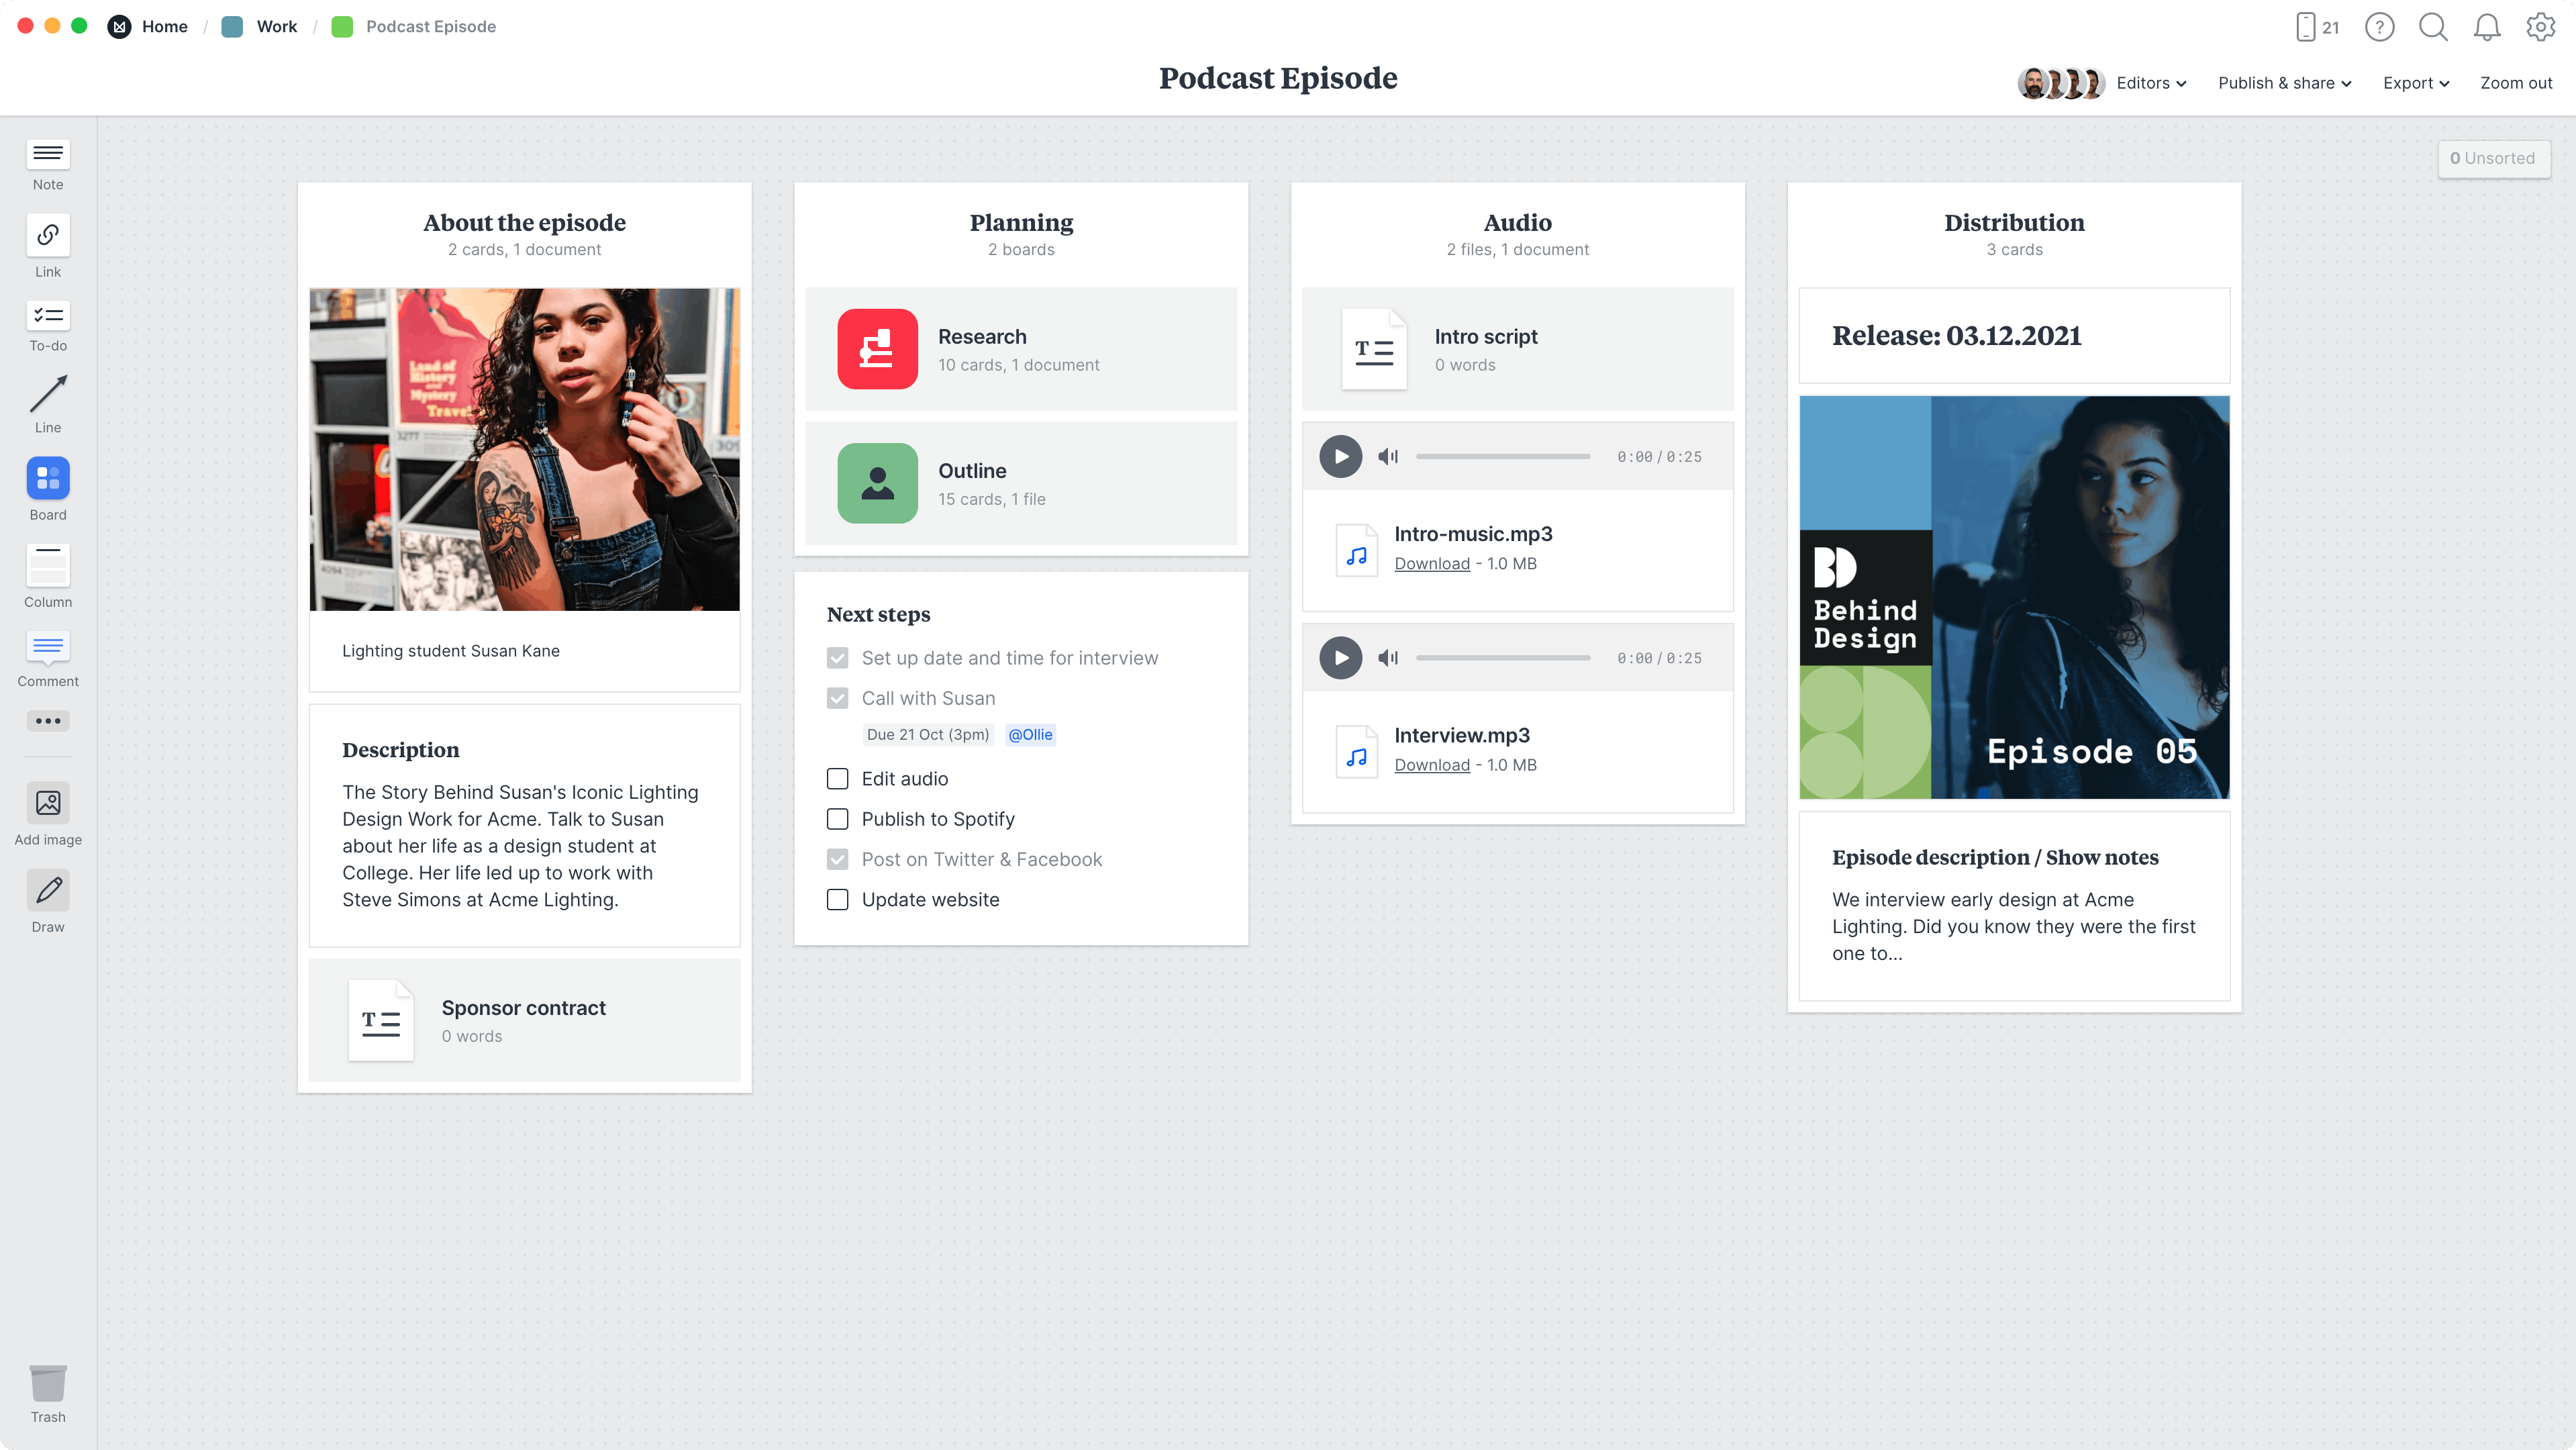 Podcast Episode Plan Template, within the Milanote app